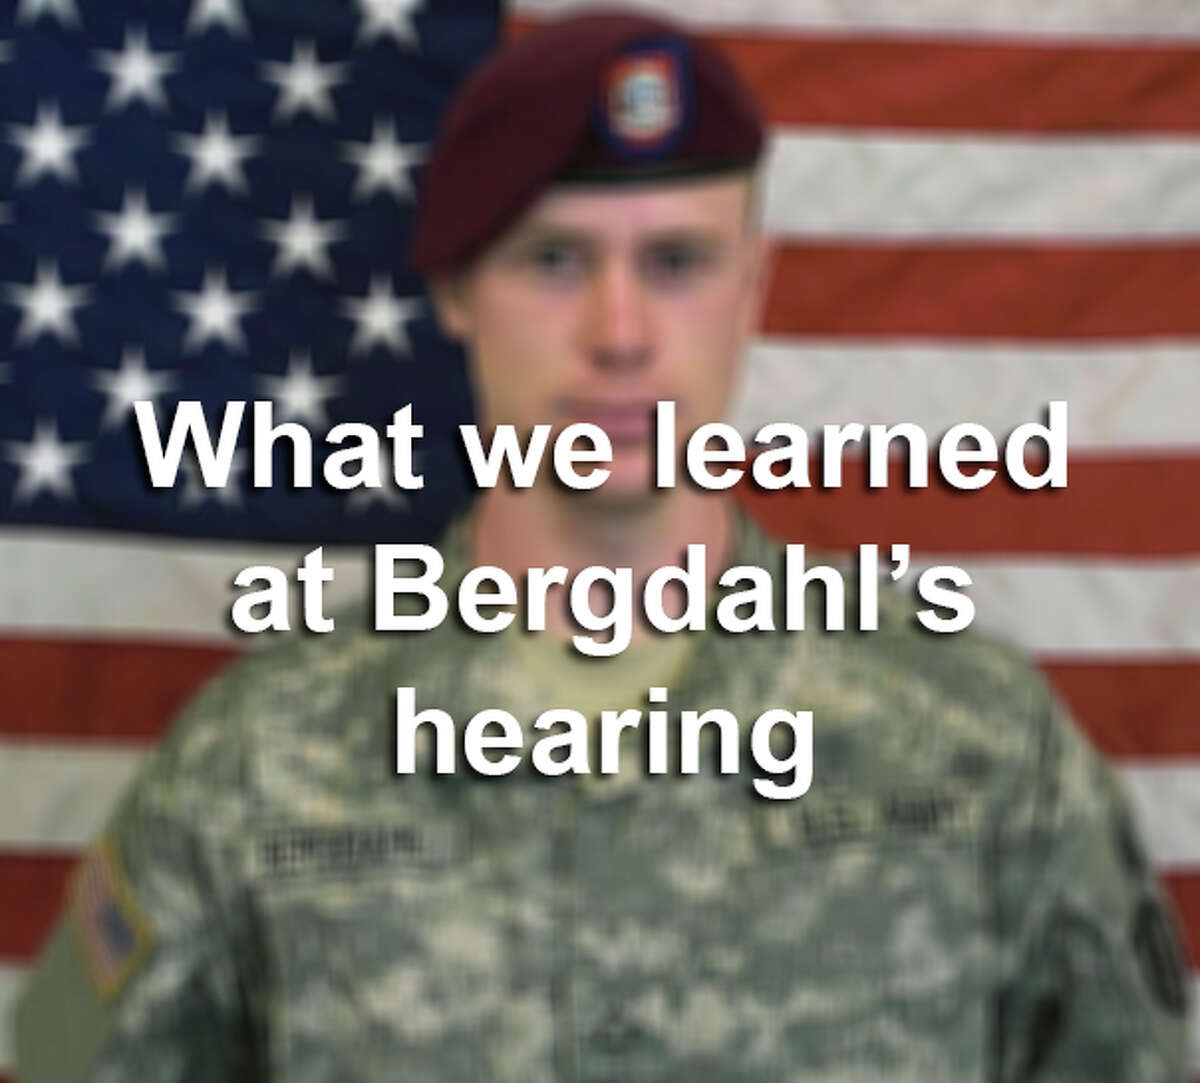 Click through the gallery to see what we learned at Bergdahl's hearing today.